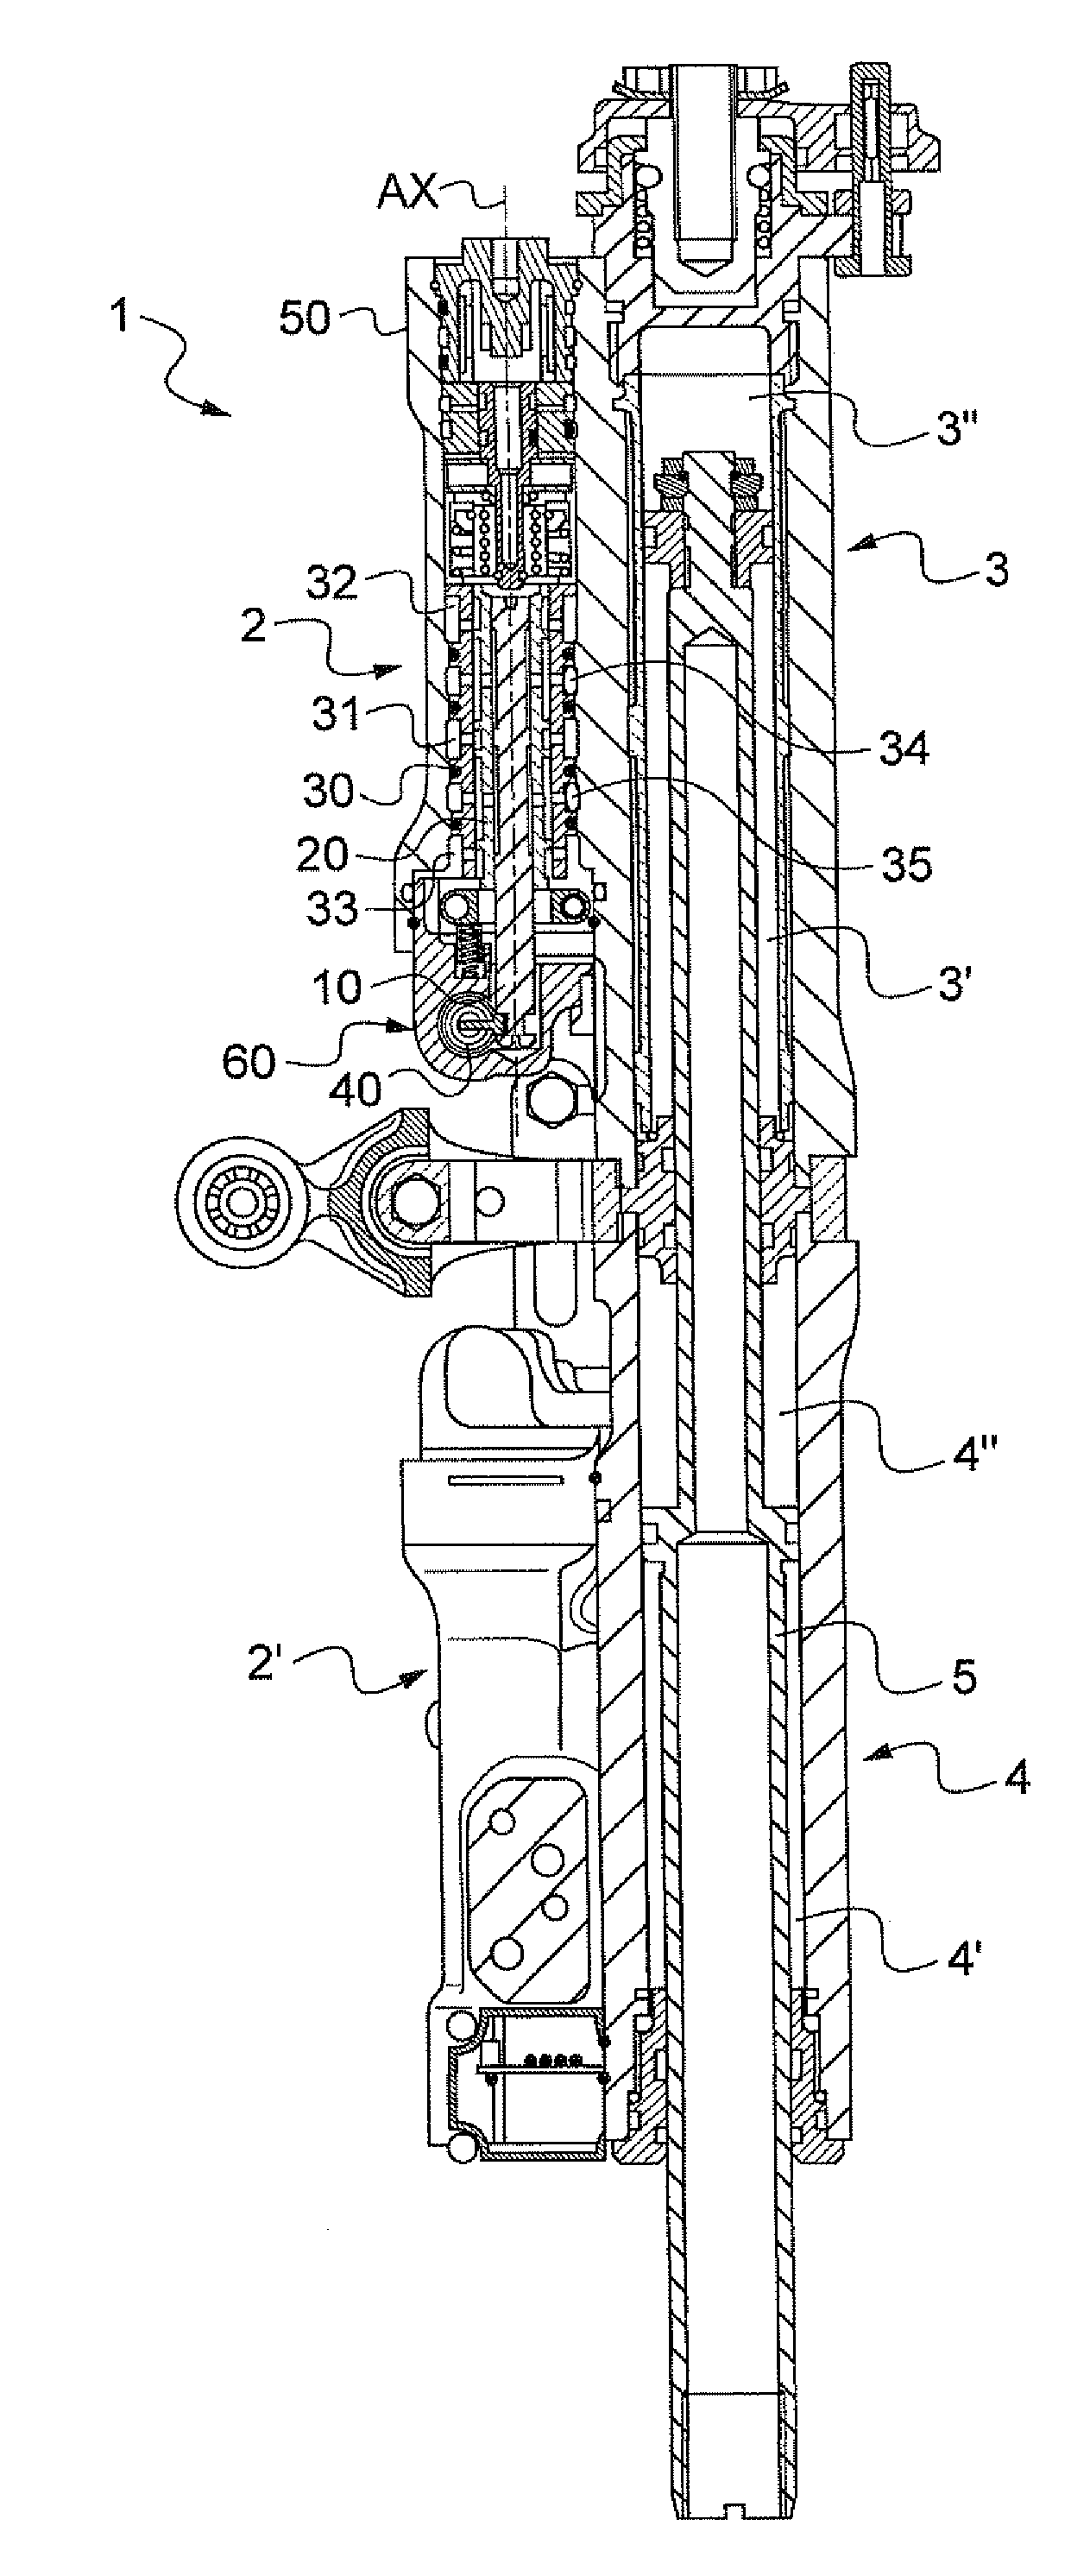 Hydraulic distributor provided with a device for detecting seizing